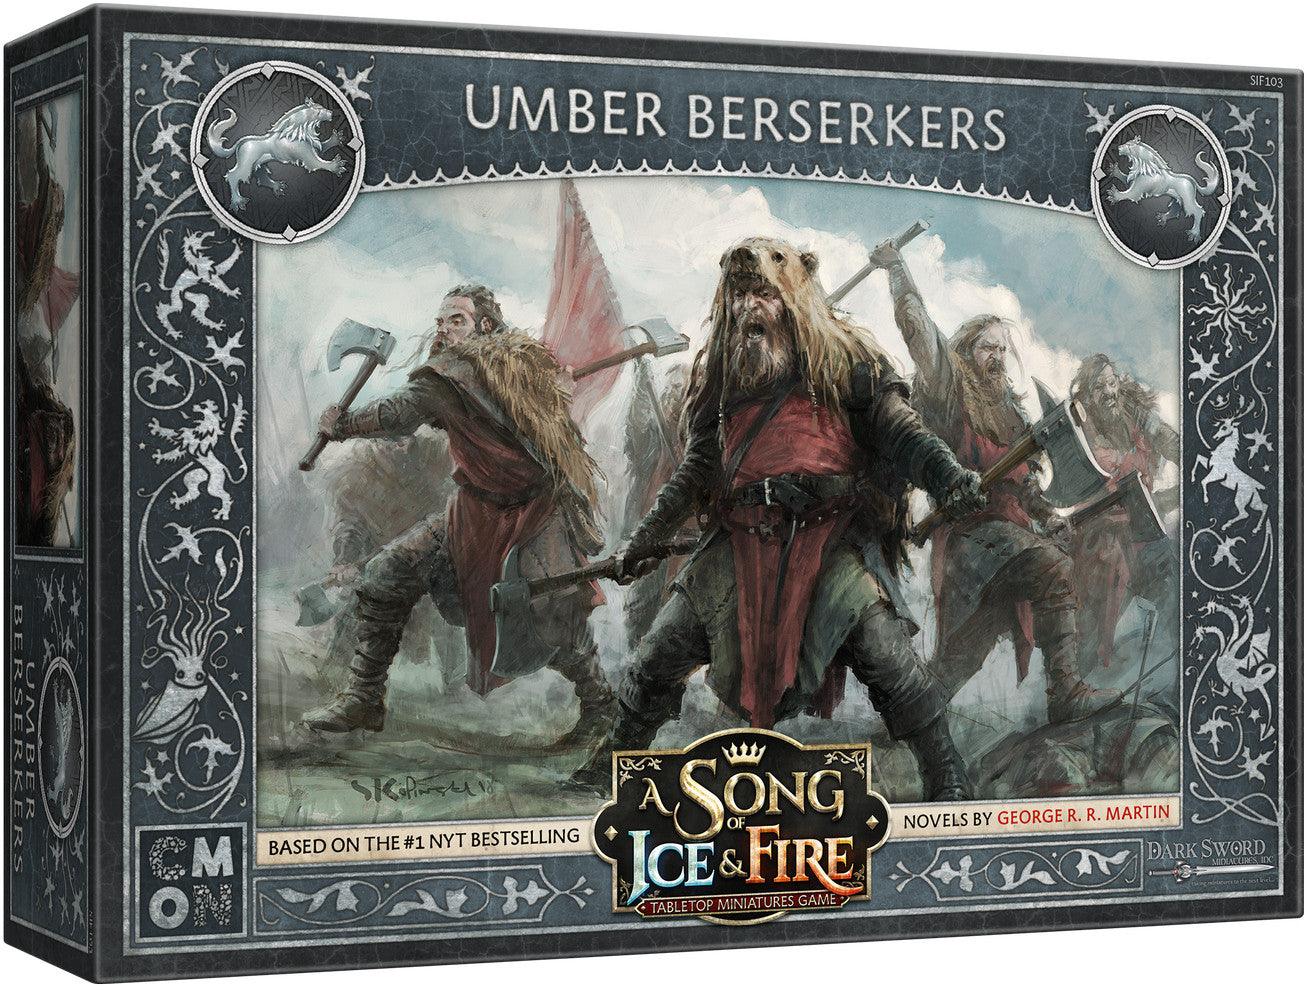 VR-60549 A Song of Ice and Fire TMG - Umber Berzerkers - CMON - Titan Pop Culture